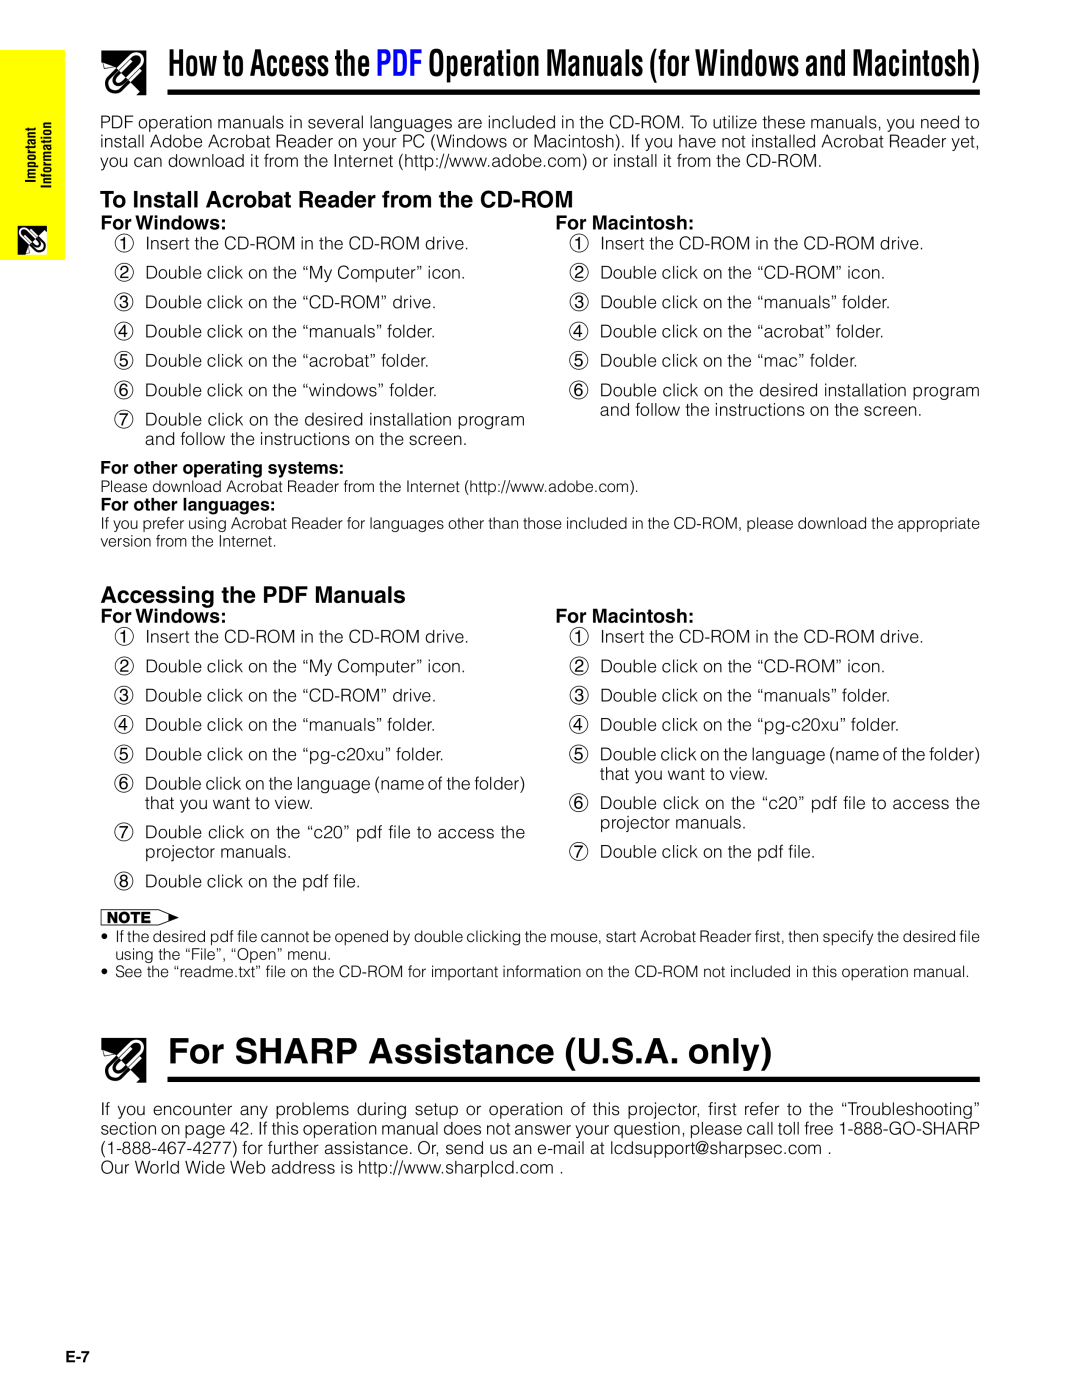 Sharp PG-C20XU For SHARP Assistance U.S.A. only, How to Access the PDF Operation Manuals for Windows and Macintosh 